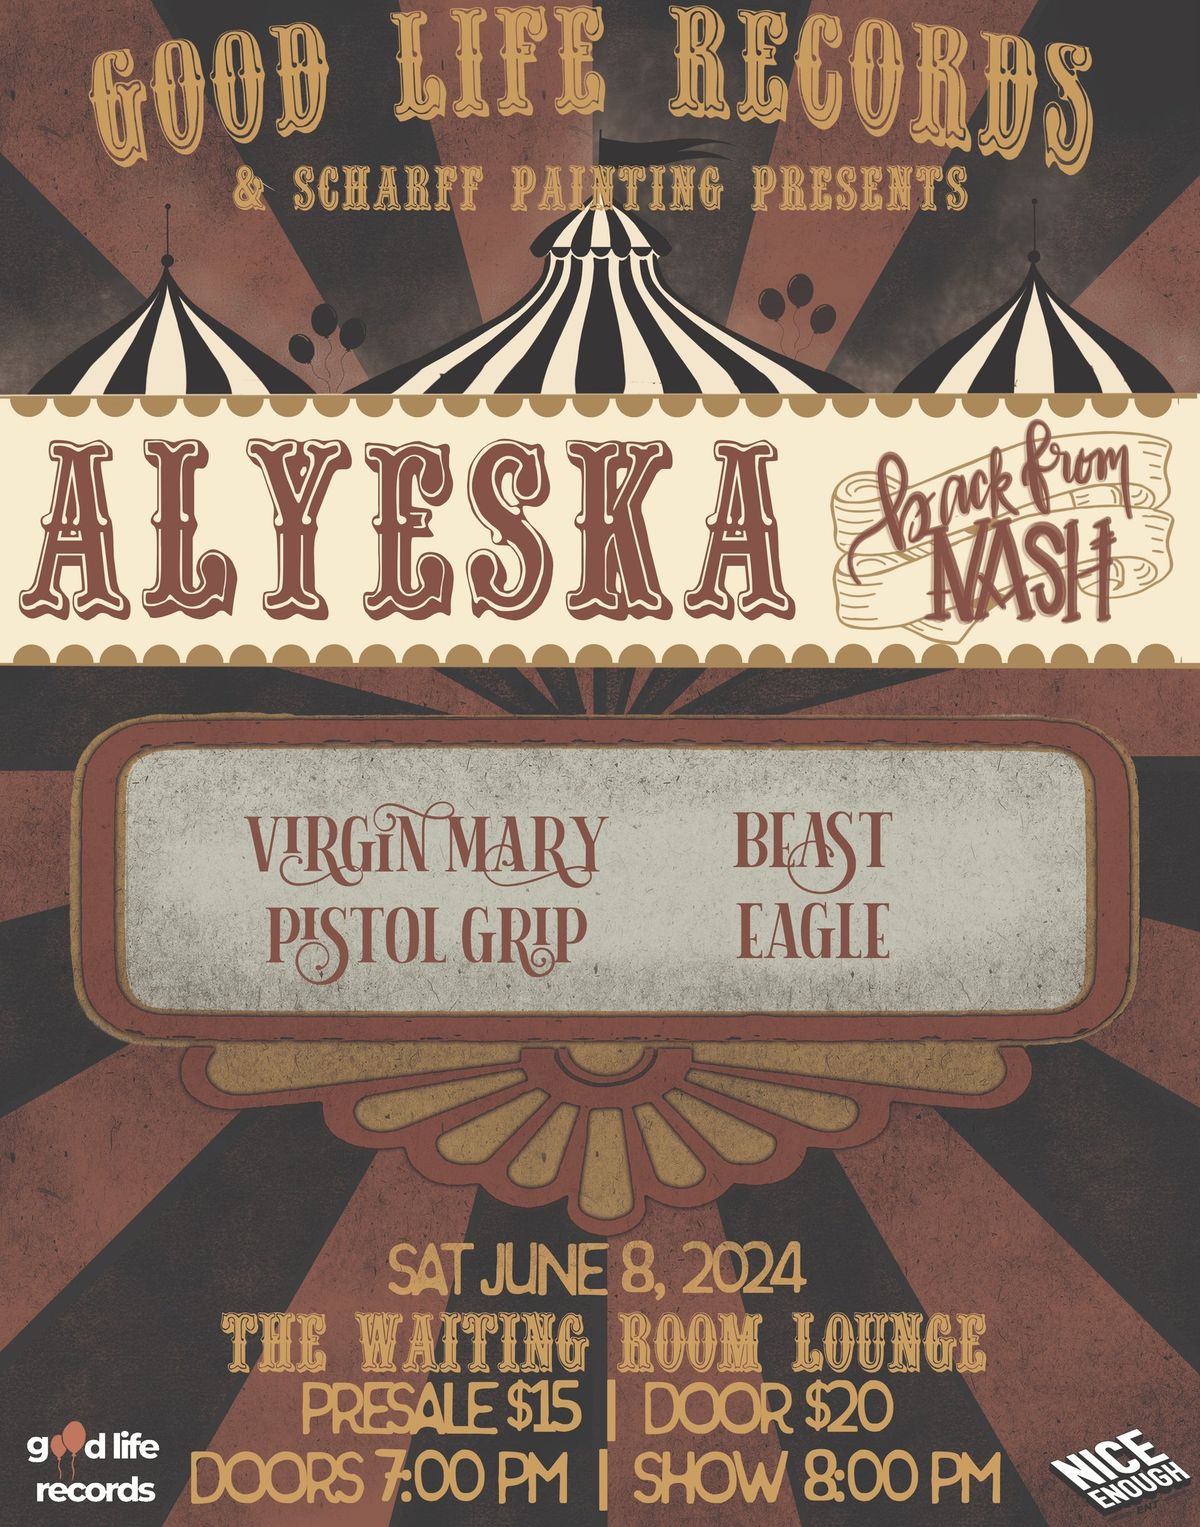 Alyeska's Back From Nash Show! featuring Virgin Mary Pistol Grip, Beast Eagle and more! 